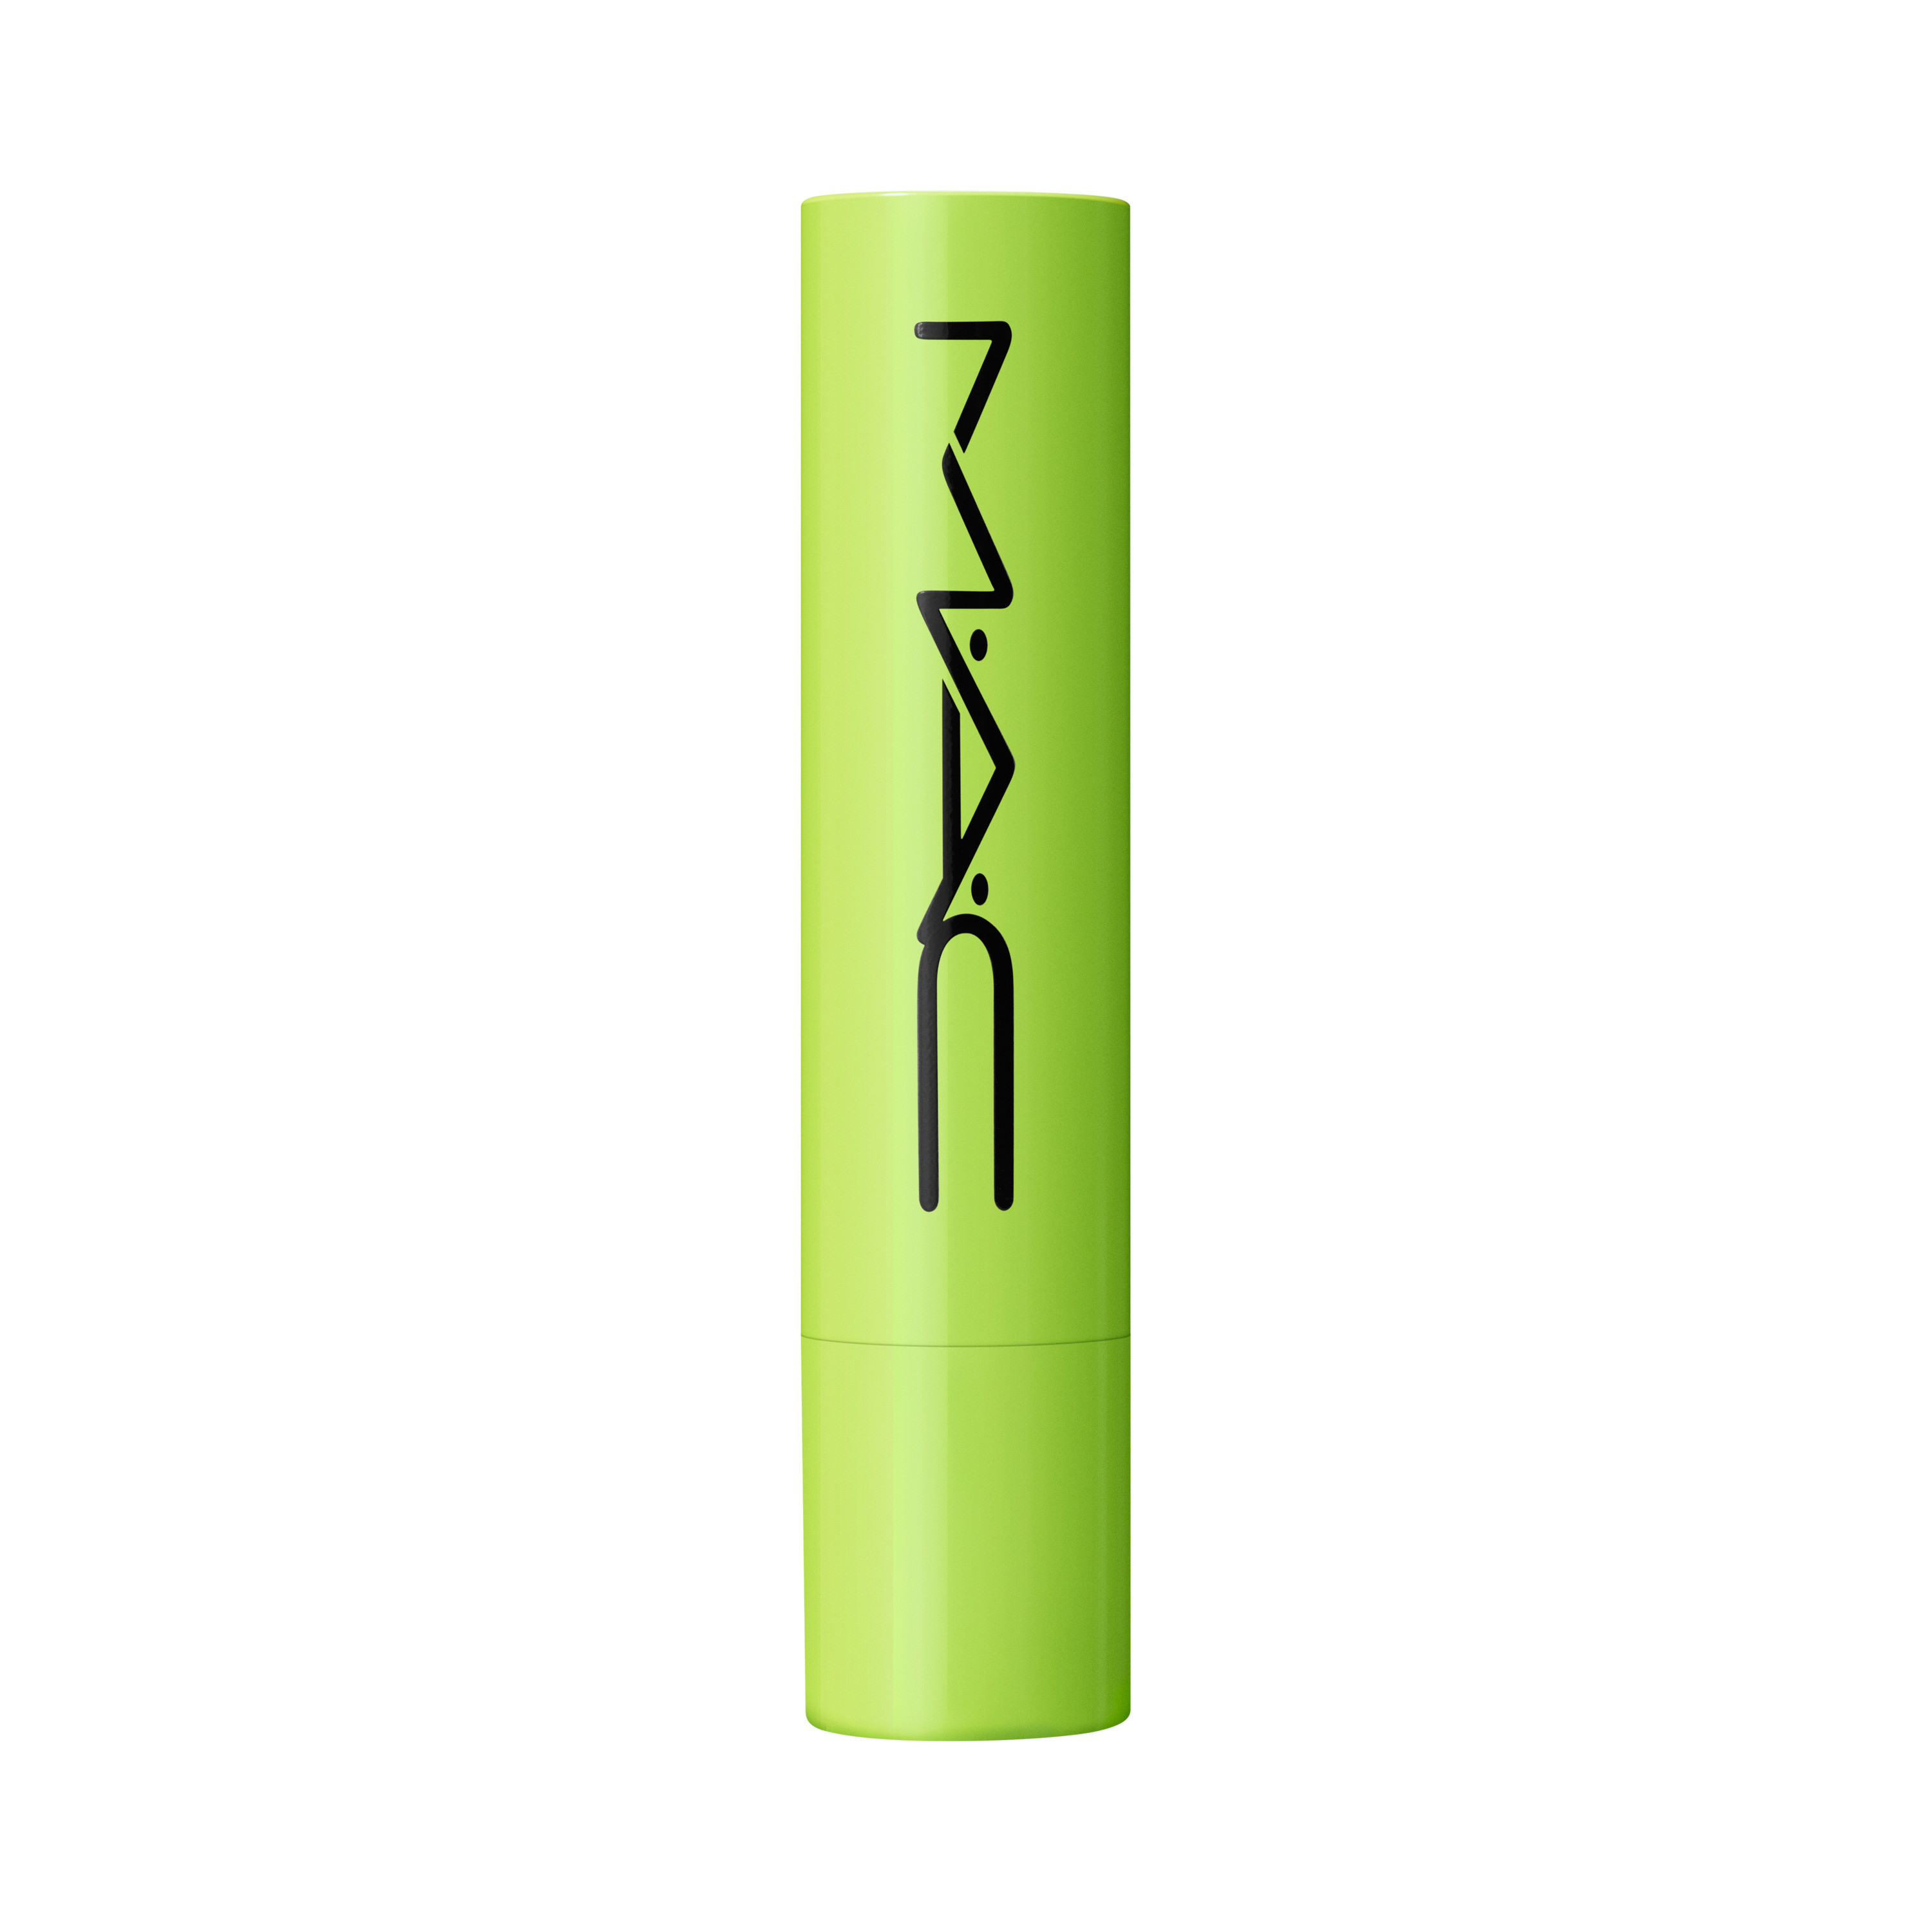 Squirt plumping gloss stick - Like Squirt, Green, large image number 1